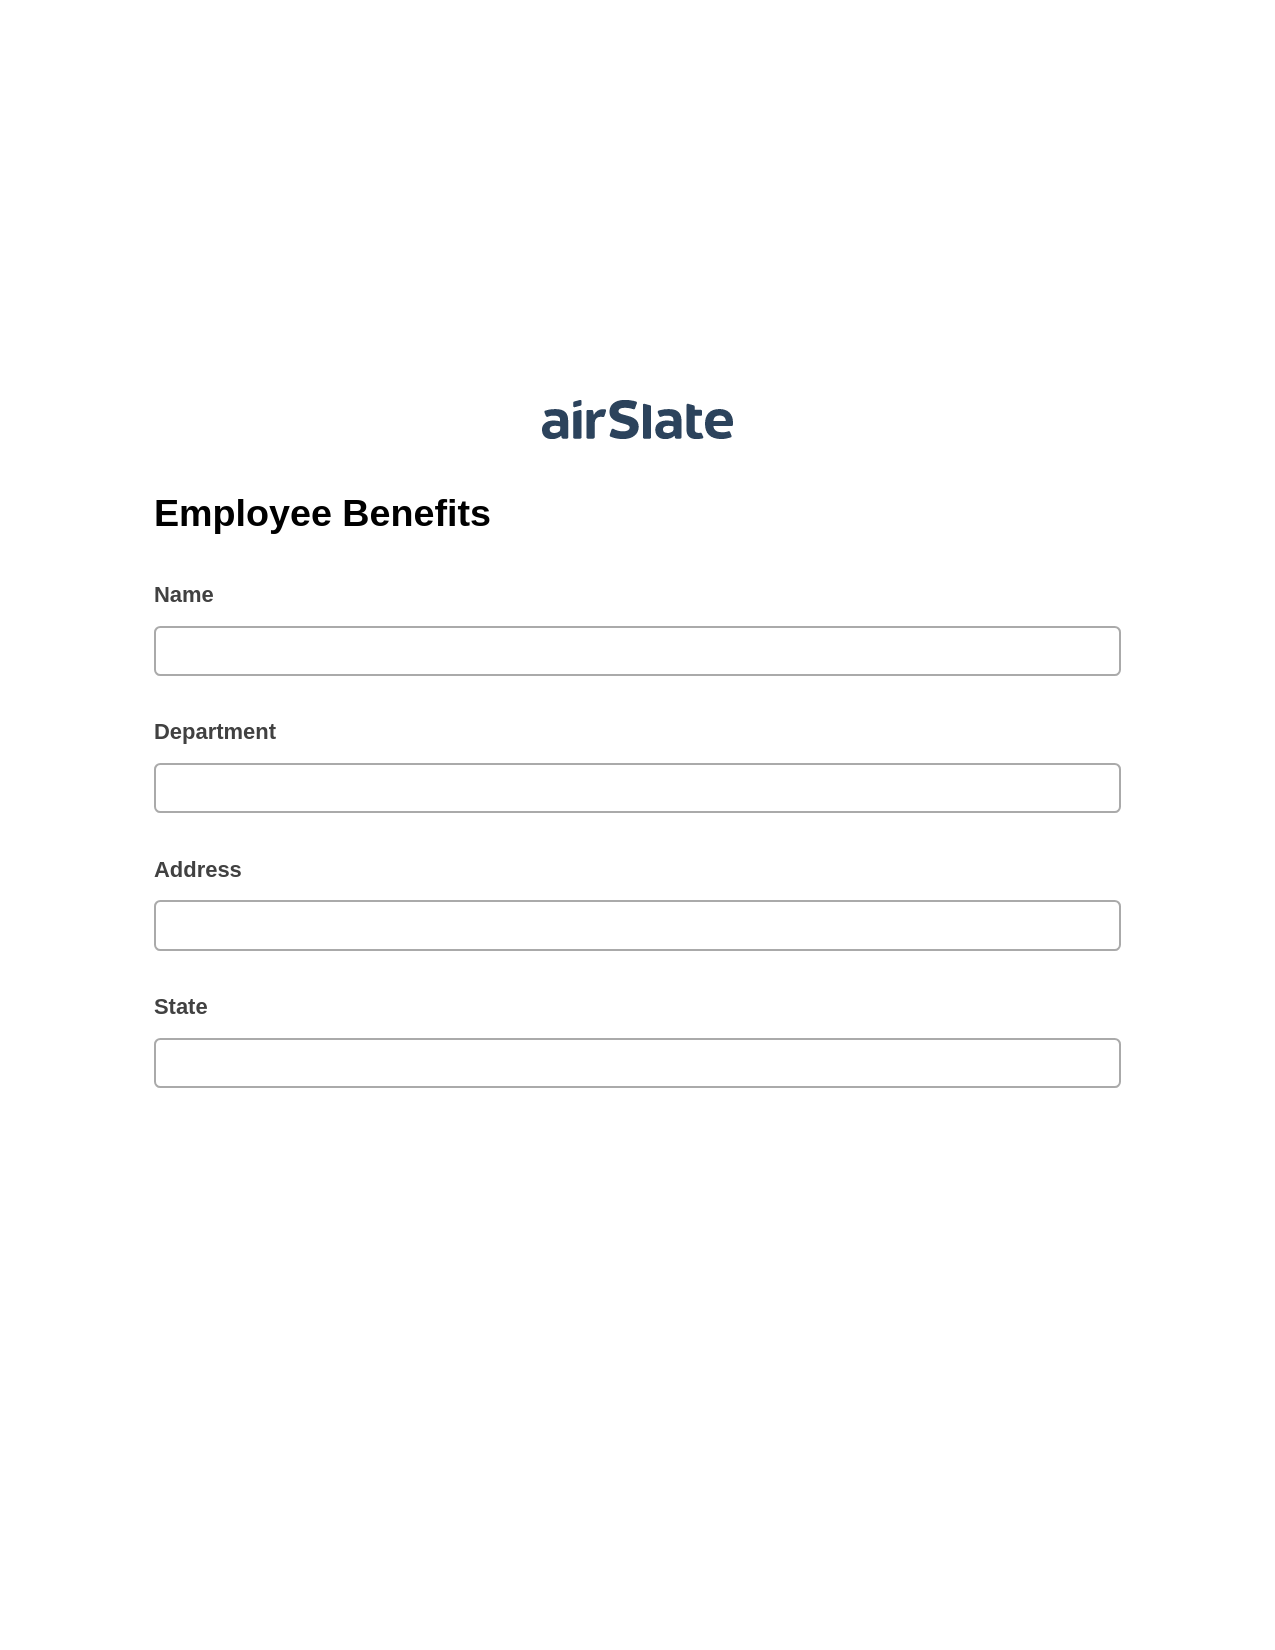 Employee Benefits Pre-fill from CSV File Bot, Open as Role Bot, Post-finish Document Bot